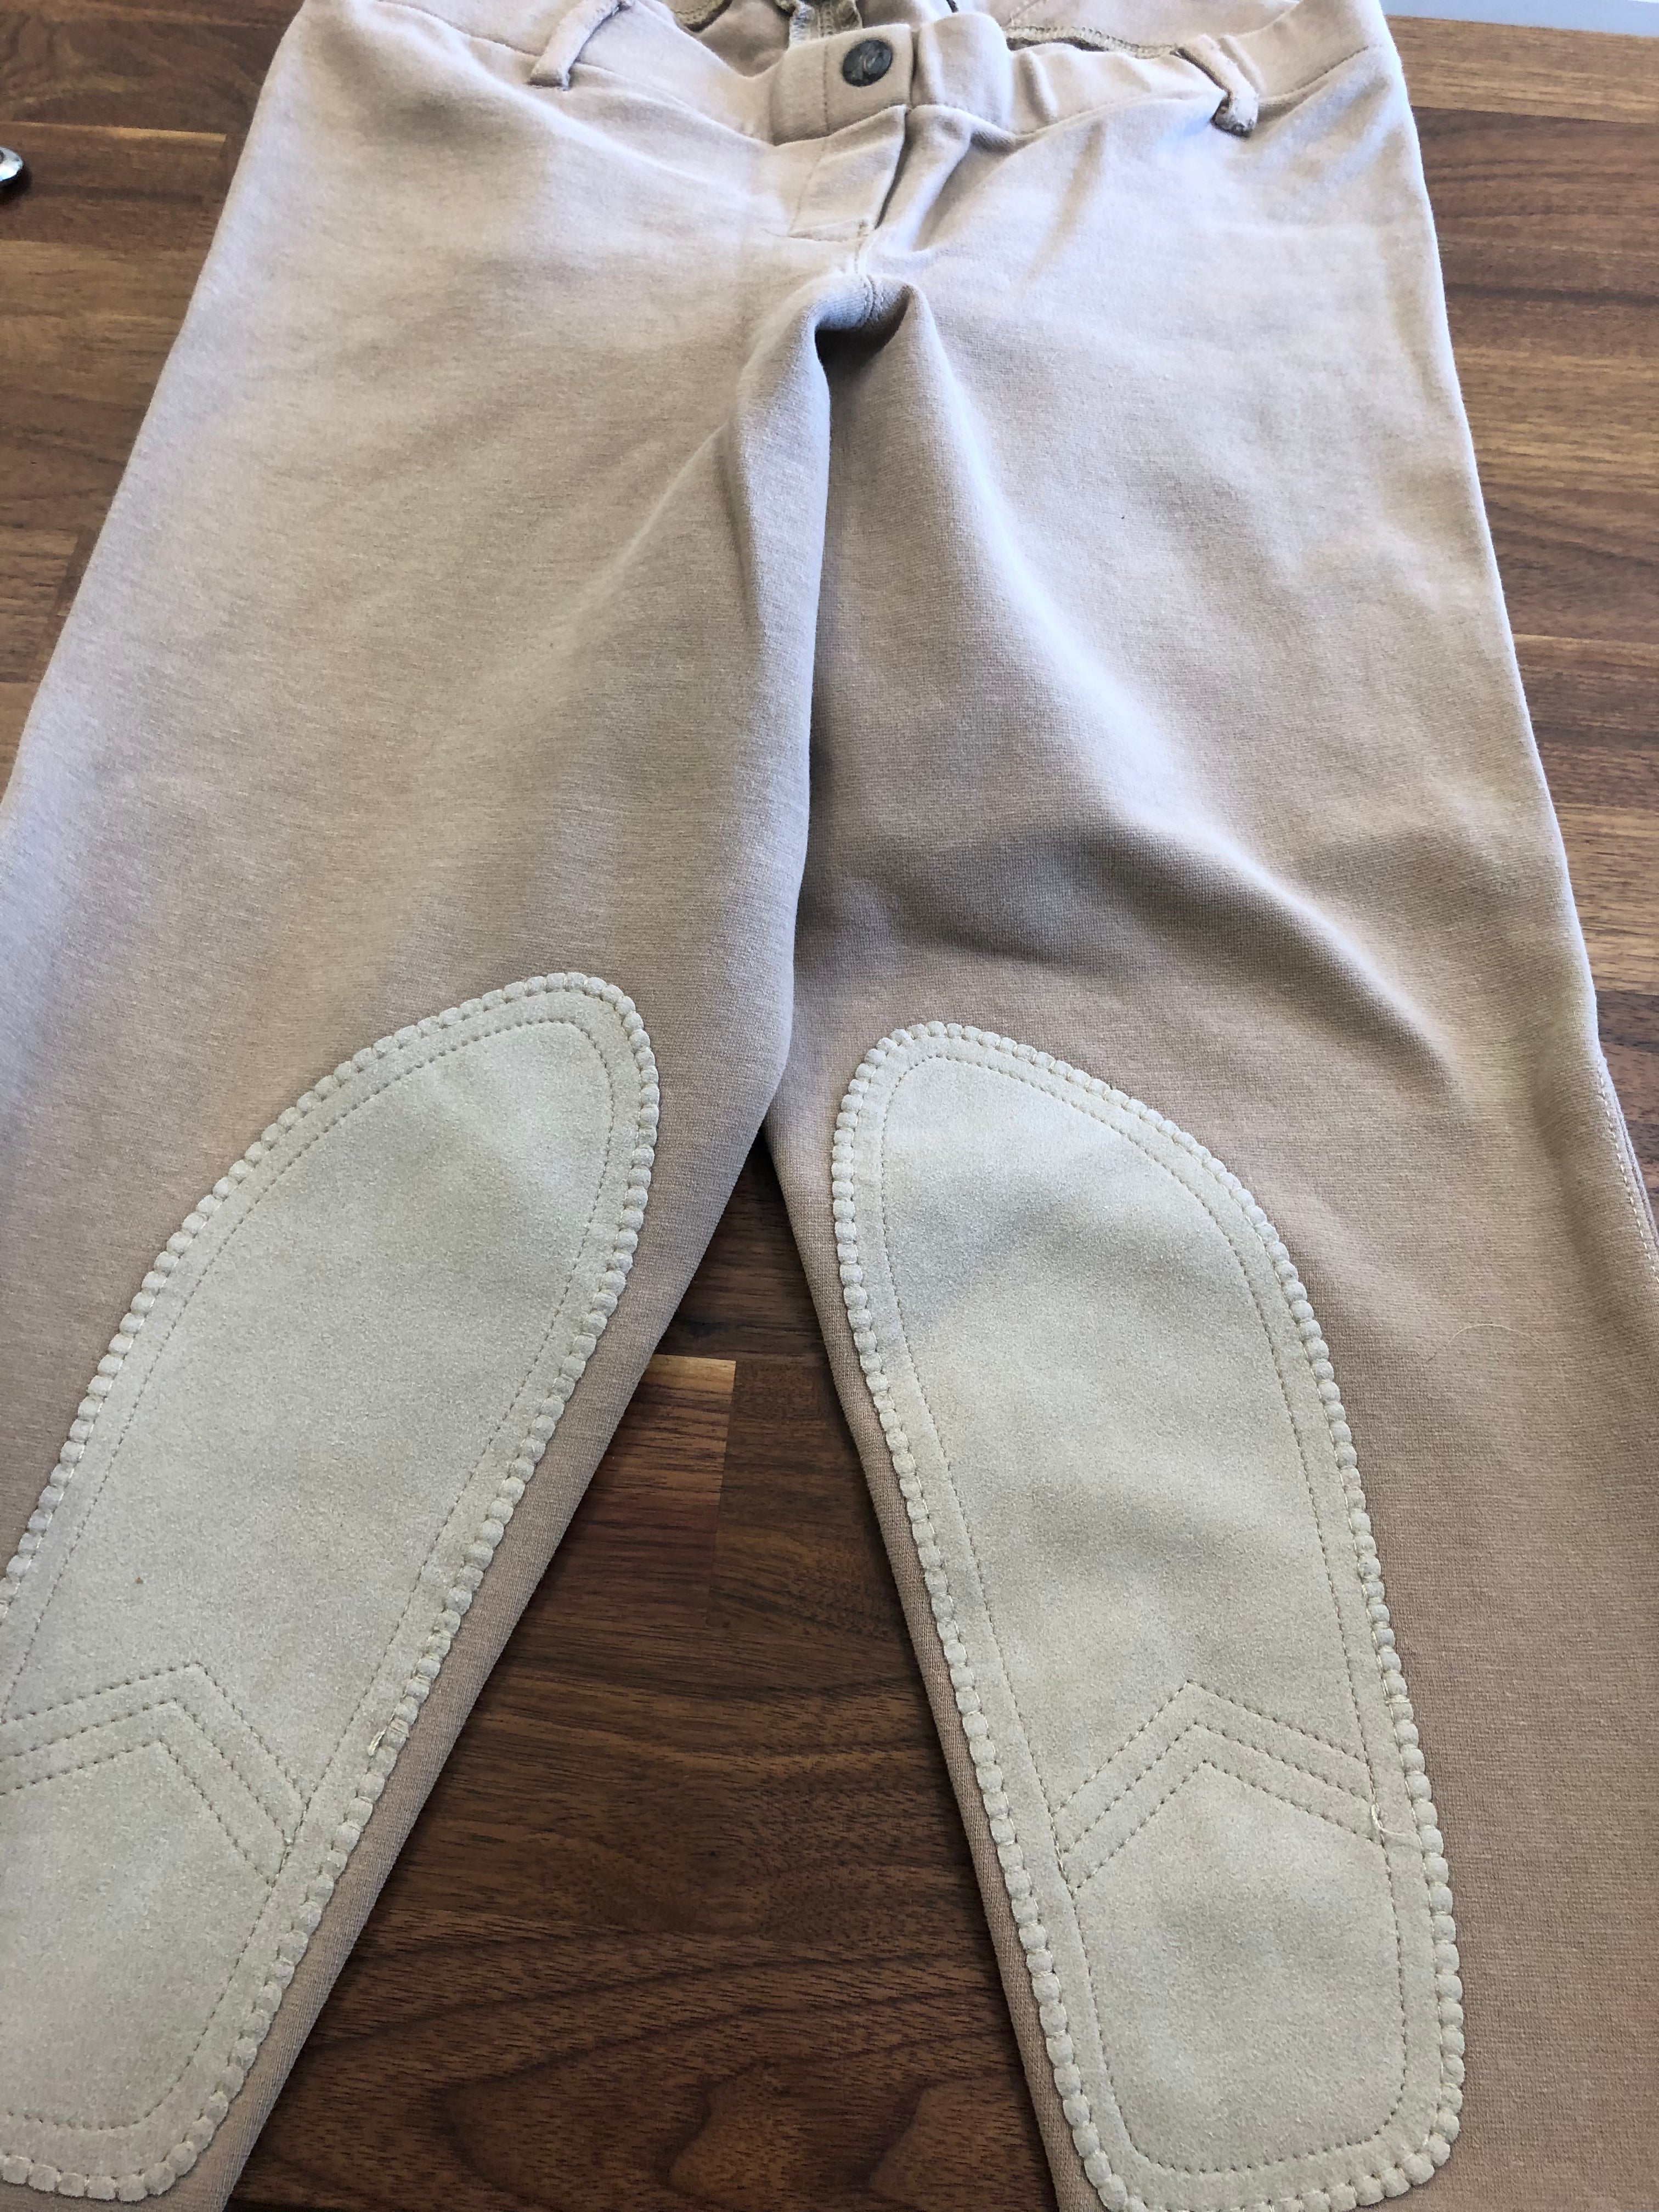 Tan Elation Pull On Knee Patch Breeches - 28R